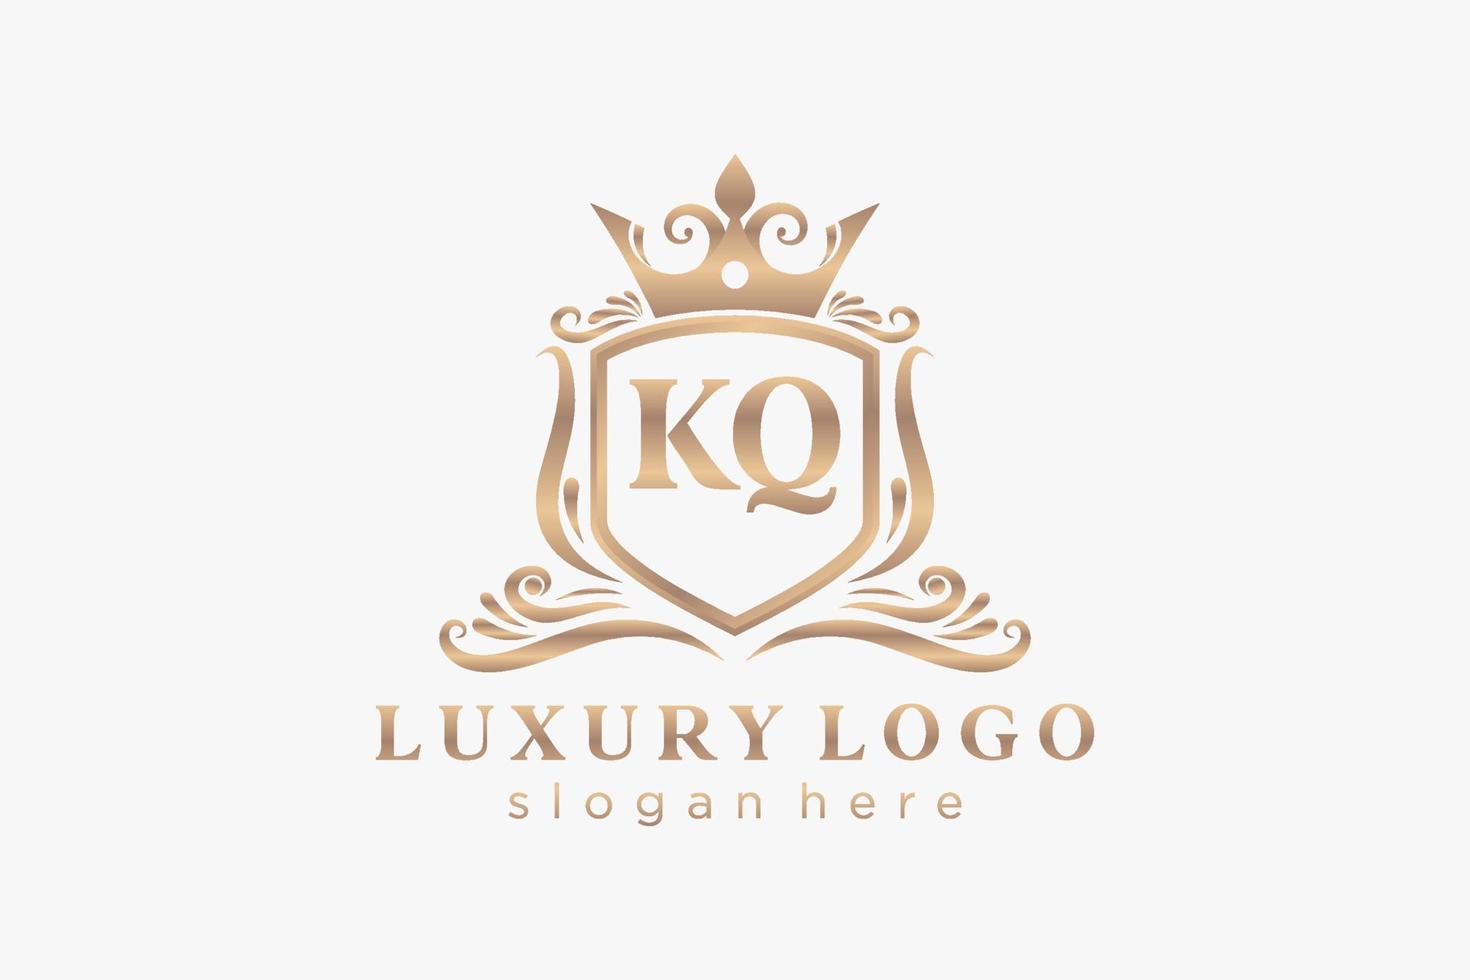 Initial KQ Letter Royal Luxury Logo template in vector art for Restaurant, Royalty, Boutique, Cafe, Hotel, Heraldic, Jewelry, Fashion and other vector illustration.